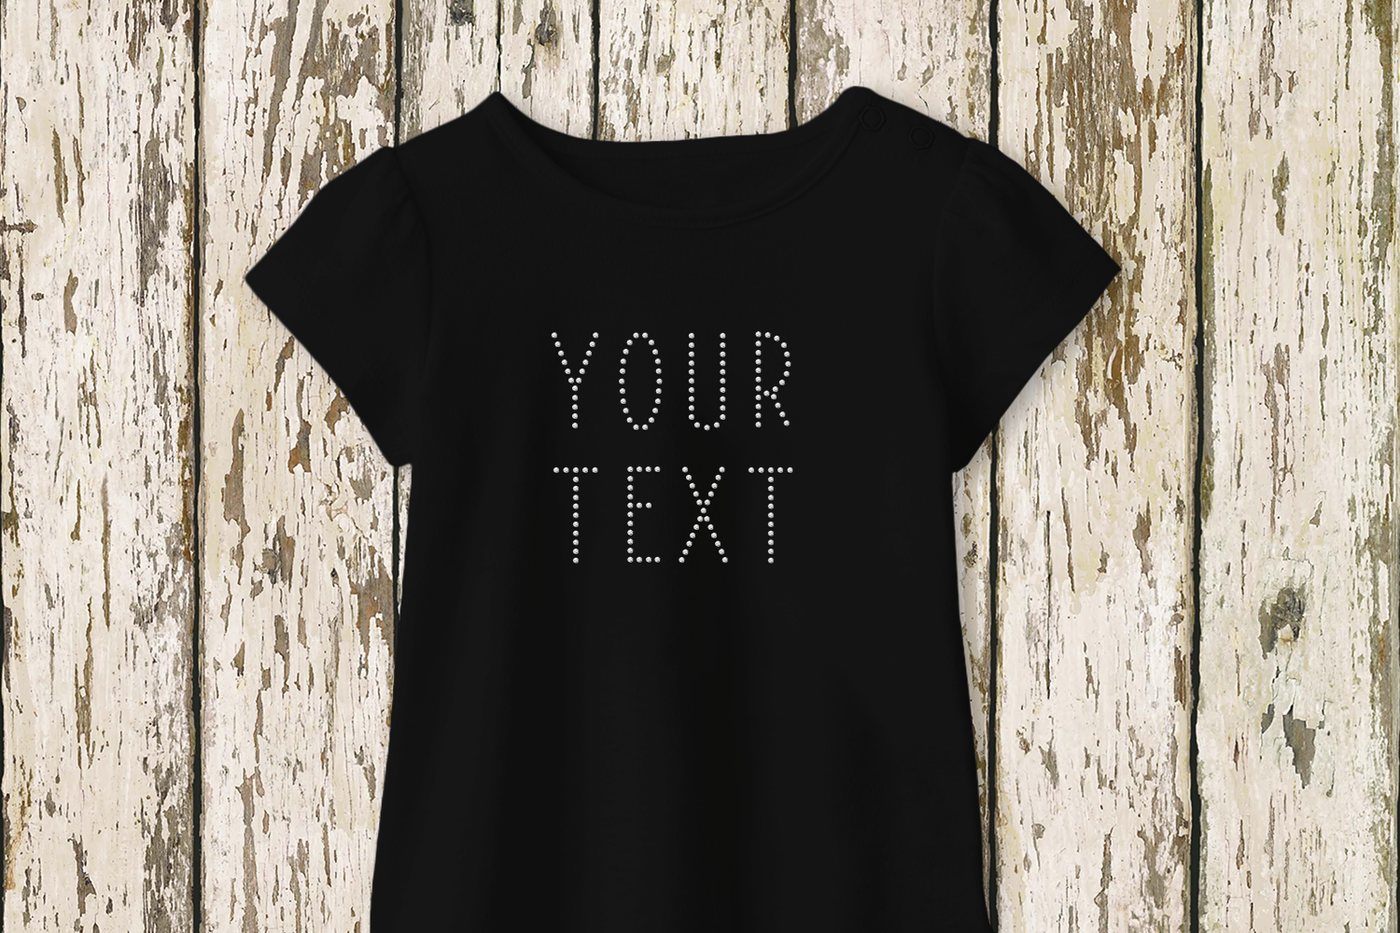 A black tee with the phrase "YOUR TEXT" made out of clear rhinestones.